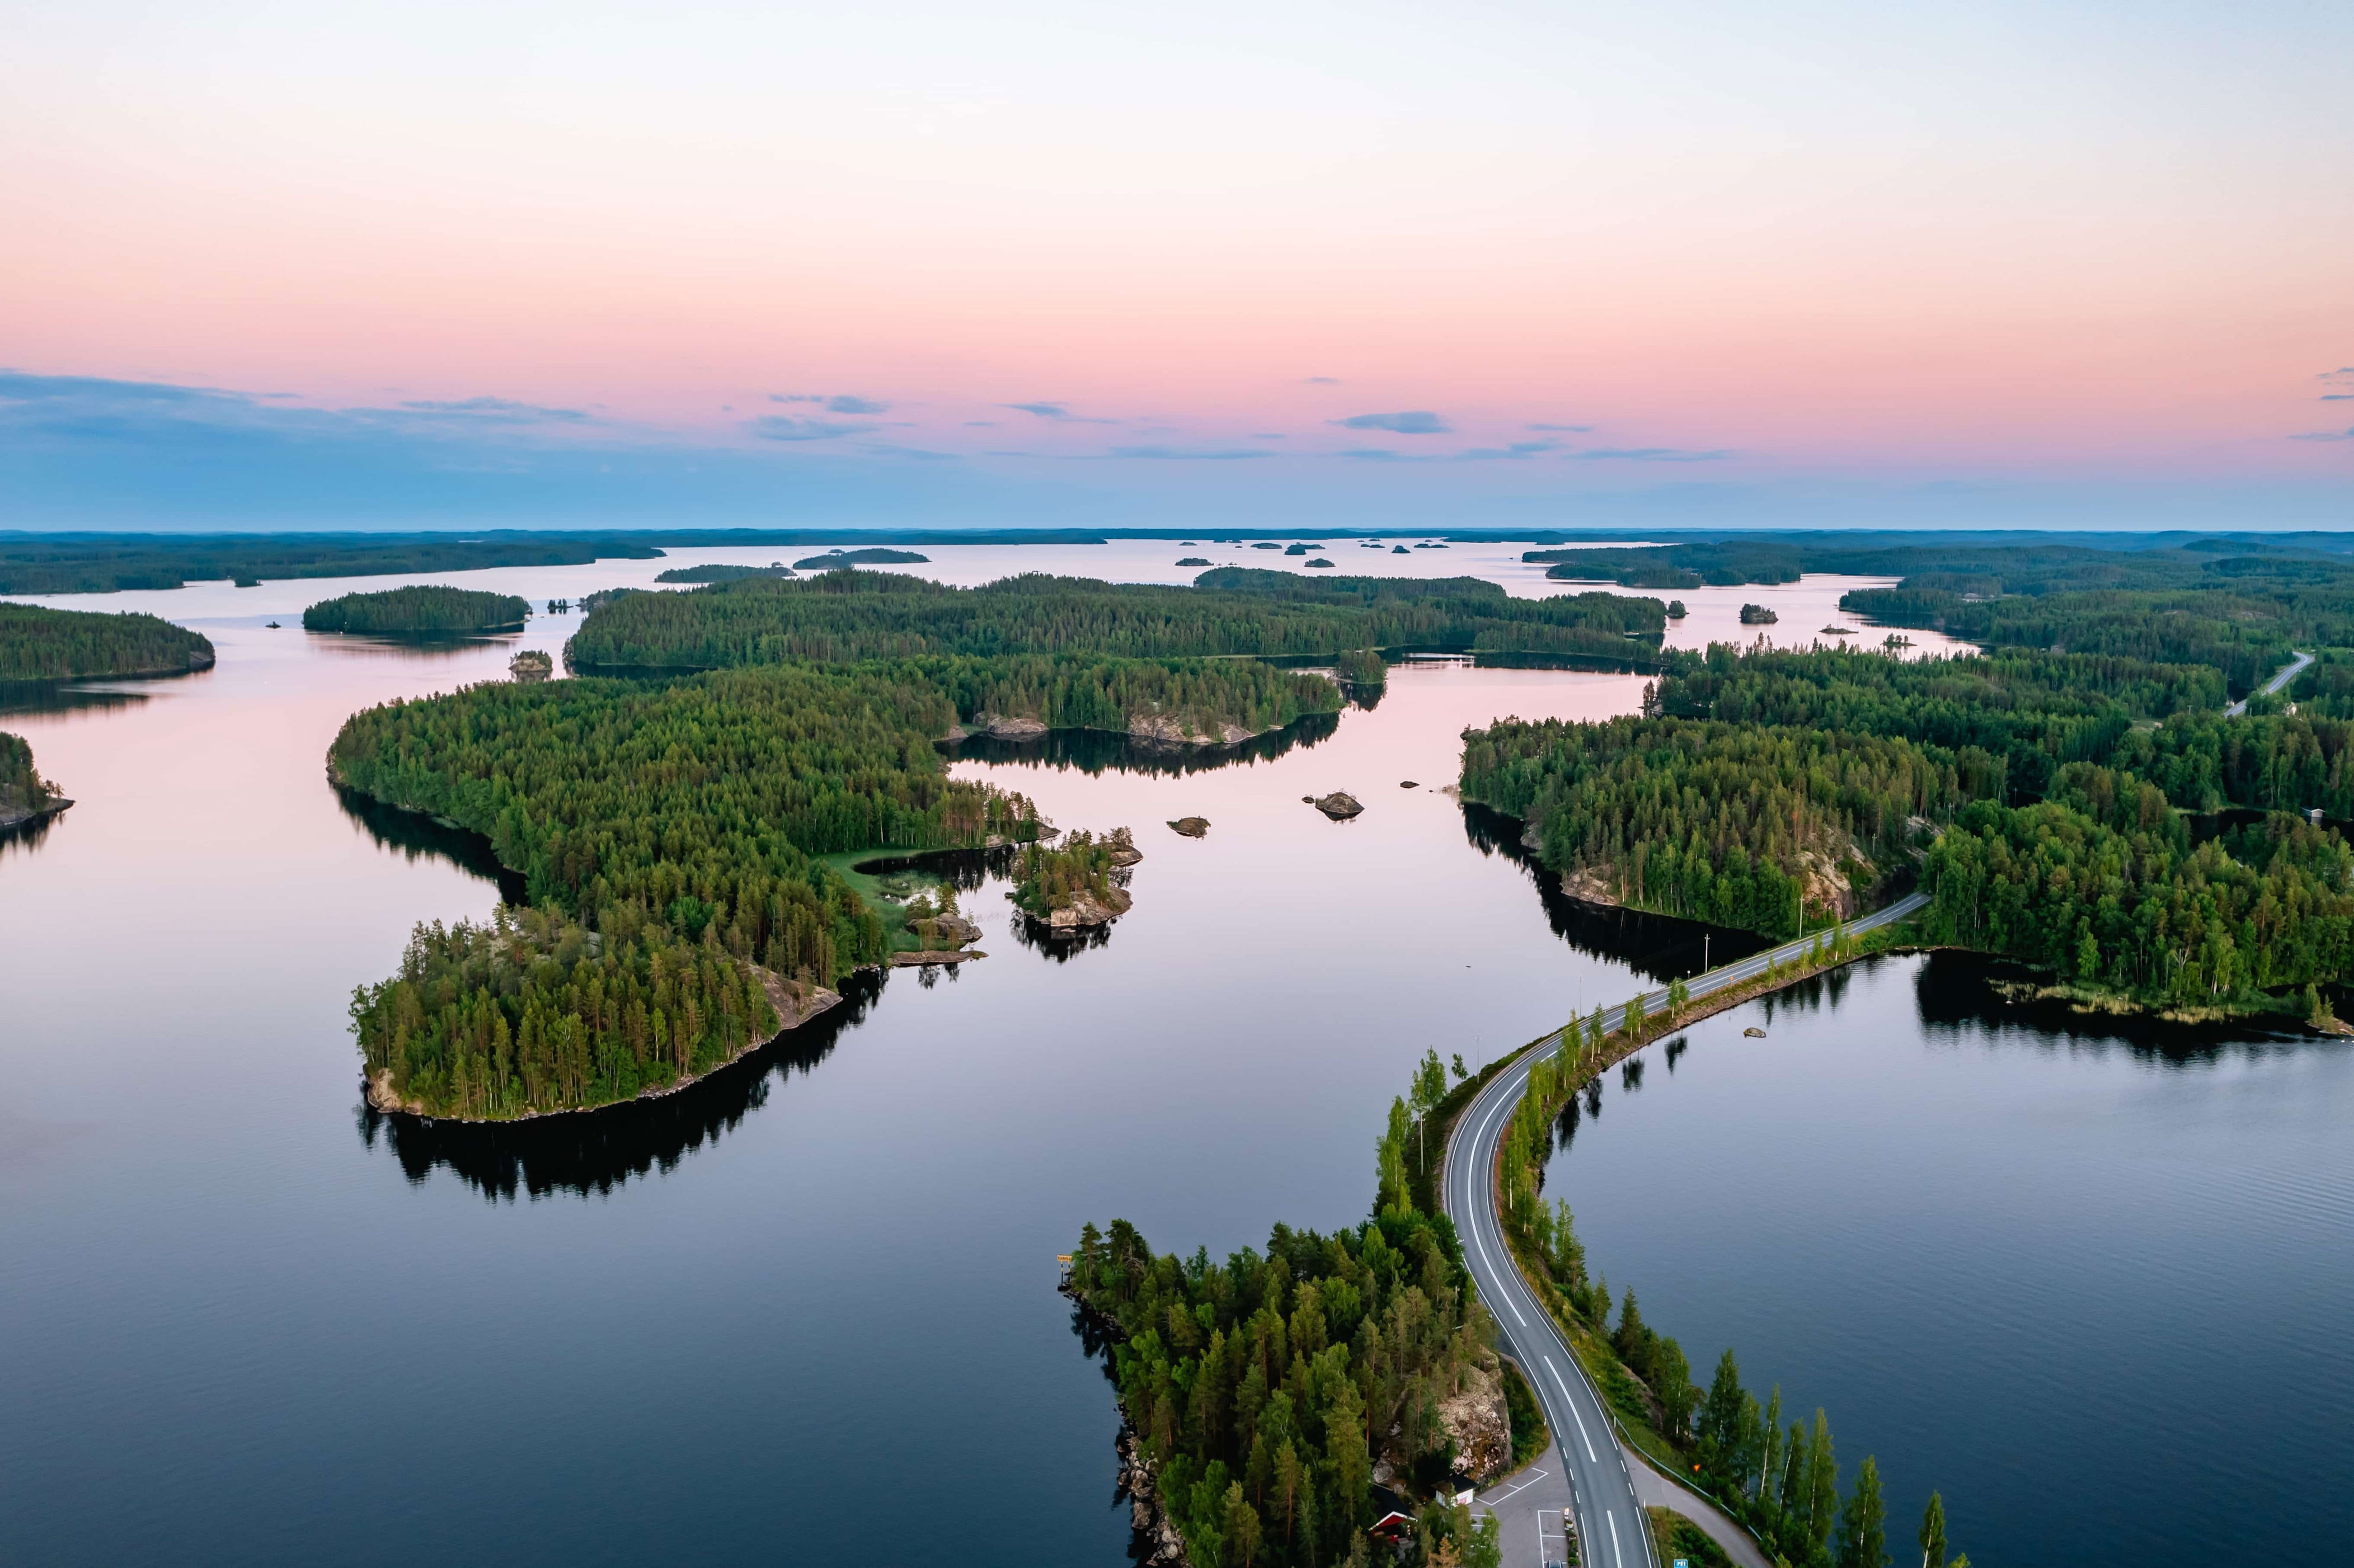 Finland’s Saimaa region was awarded the title of <a href="https://www.tastesaimaa.fi/saimaa-european-region-of-gastronomy#:~:text=The%20Saimaa%20region%20has%20been,Lakeland%20with%20all%20their%20senses." rel="noreferrer noopener">European Region of Gastronomy 2024</a> to celebrate the area’s unique food culture. Saimaa is Finland’s largest lake, has the world’s longest lake coastline, and boasts an incredible 13,710 islands. When it comes to food, the freshwater <a href="https://www.visitsaimaa.fi/en/finnish-fast-food-fried-vendace/" rel="noreferrer noopener">vendace fish</a> is a specialty in the region, while the sweet or savoury <em>l</em><em>örtsy</em> pastries are best enjoyed from the Savonlinna Market Square. From kayaking through the maze-like island chains to experiencing a traditional wood-heated sauna, there’s plenty to do in this enchanting destination.